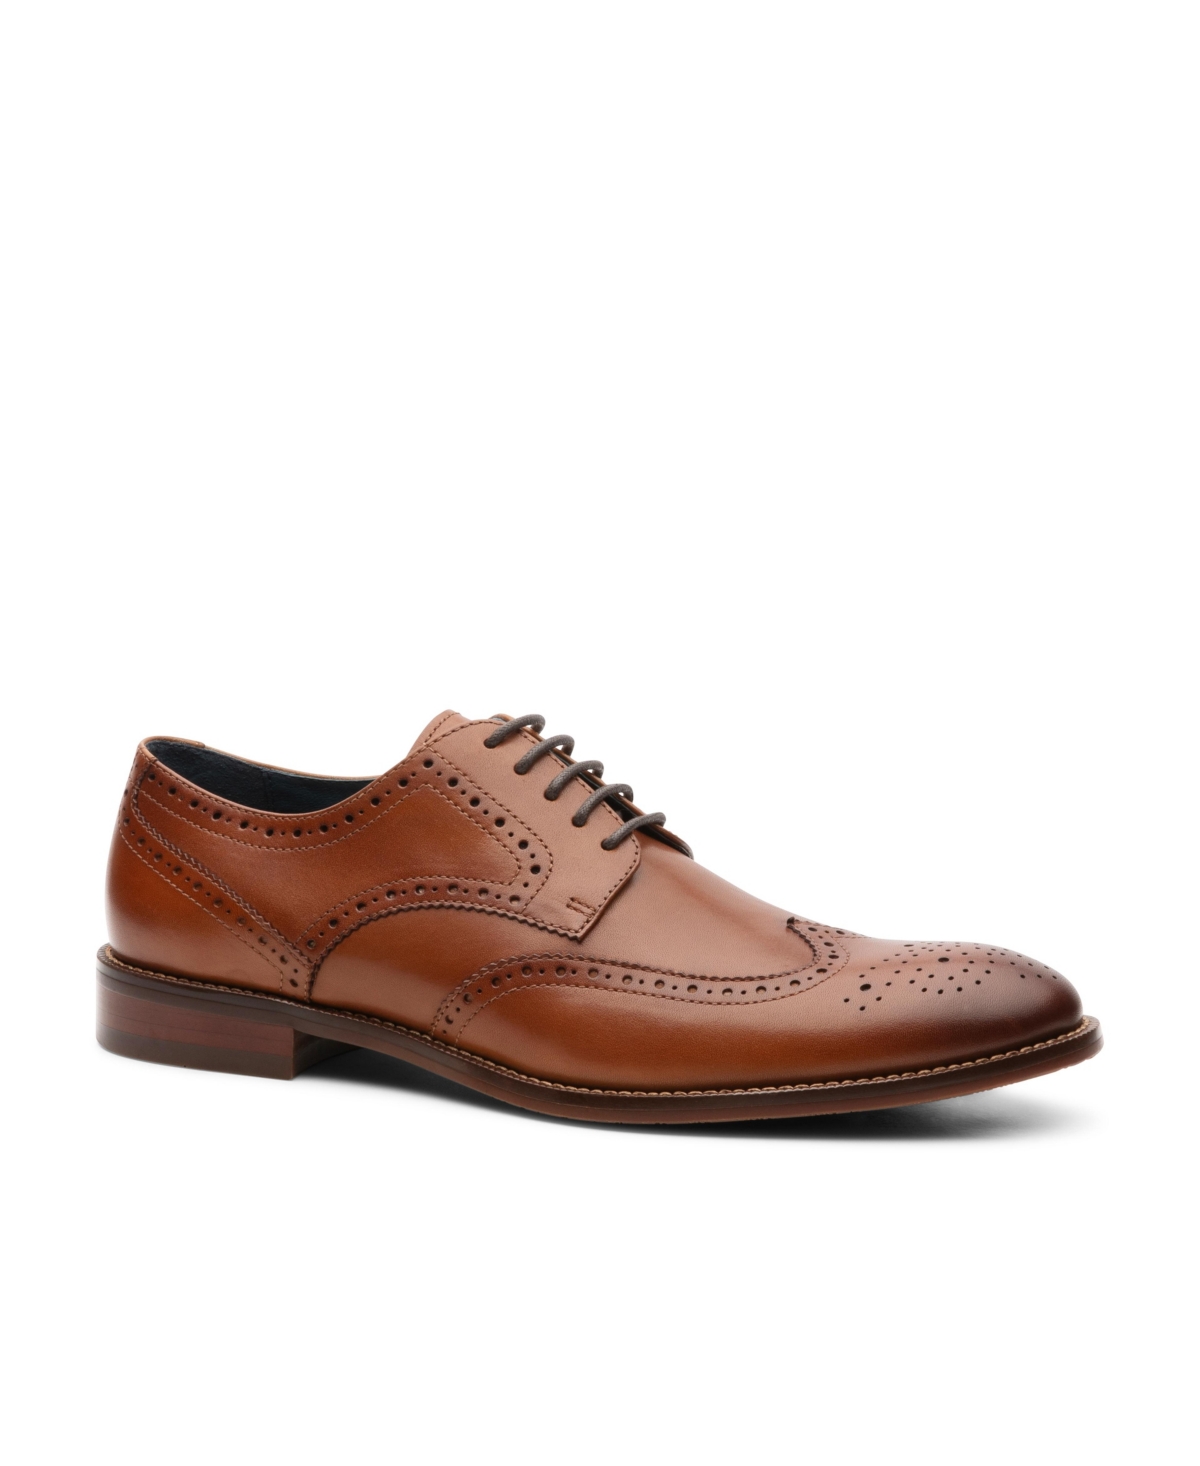 BLAKE MCKAY MEN'S MARSHALL DRESS LACE-UP WINGTIP LEATHER SHOES